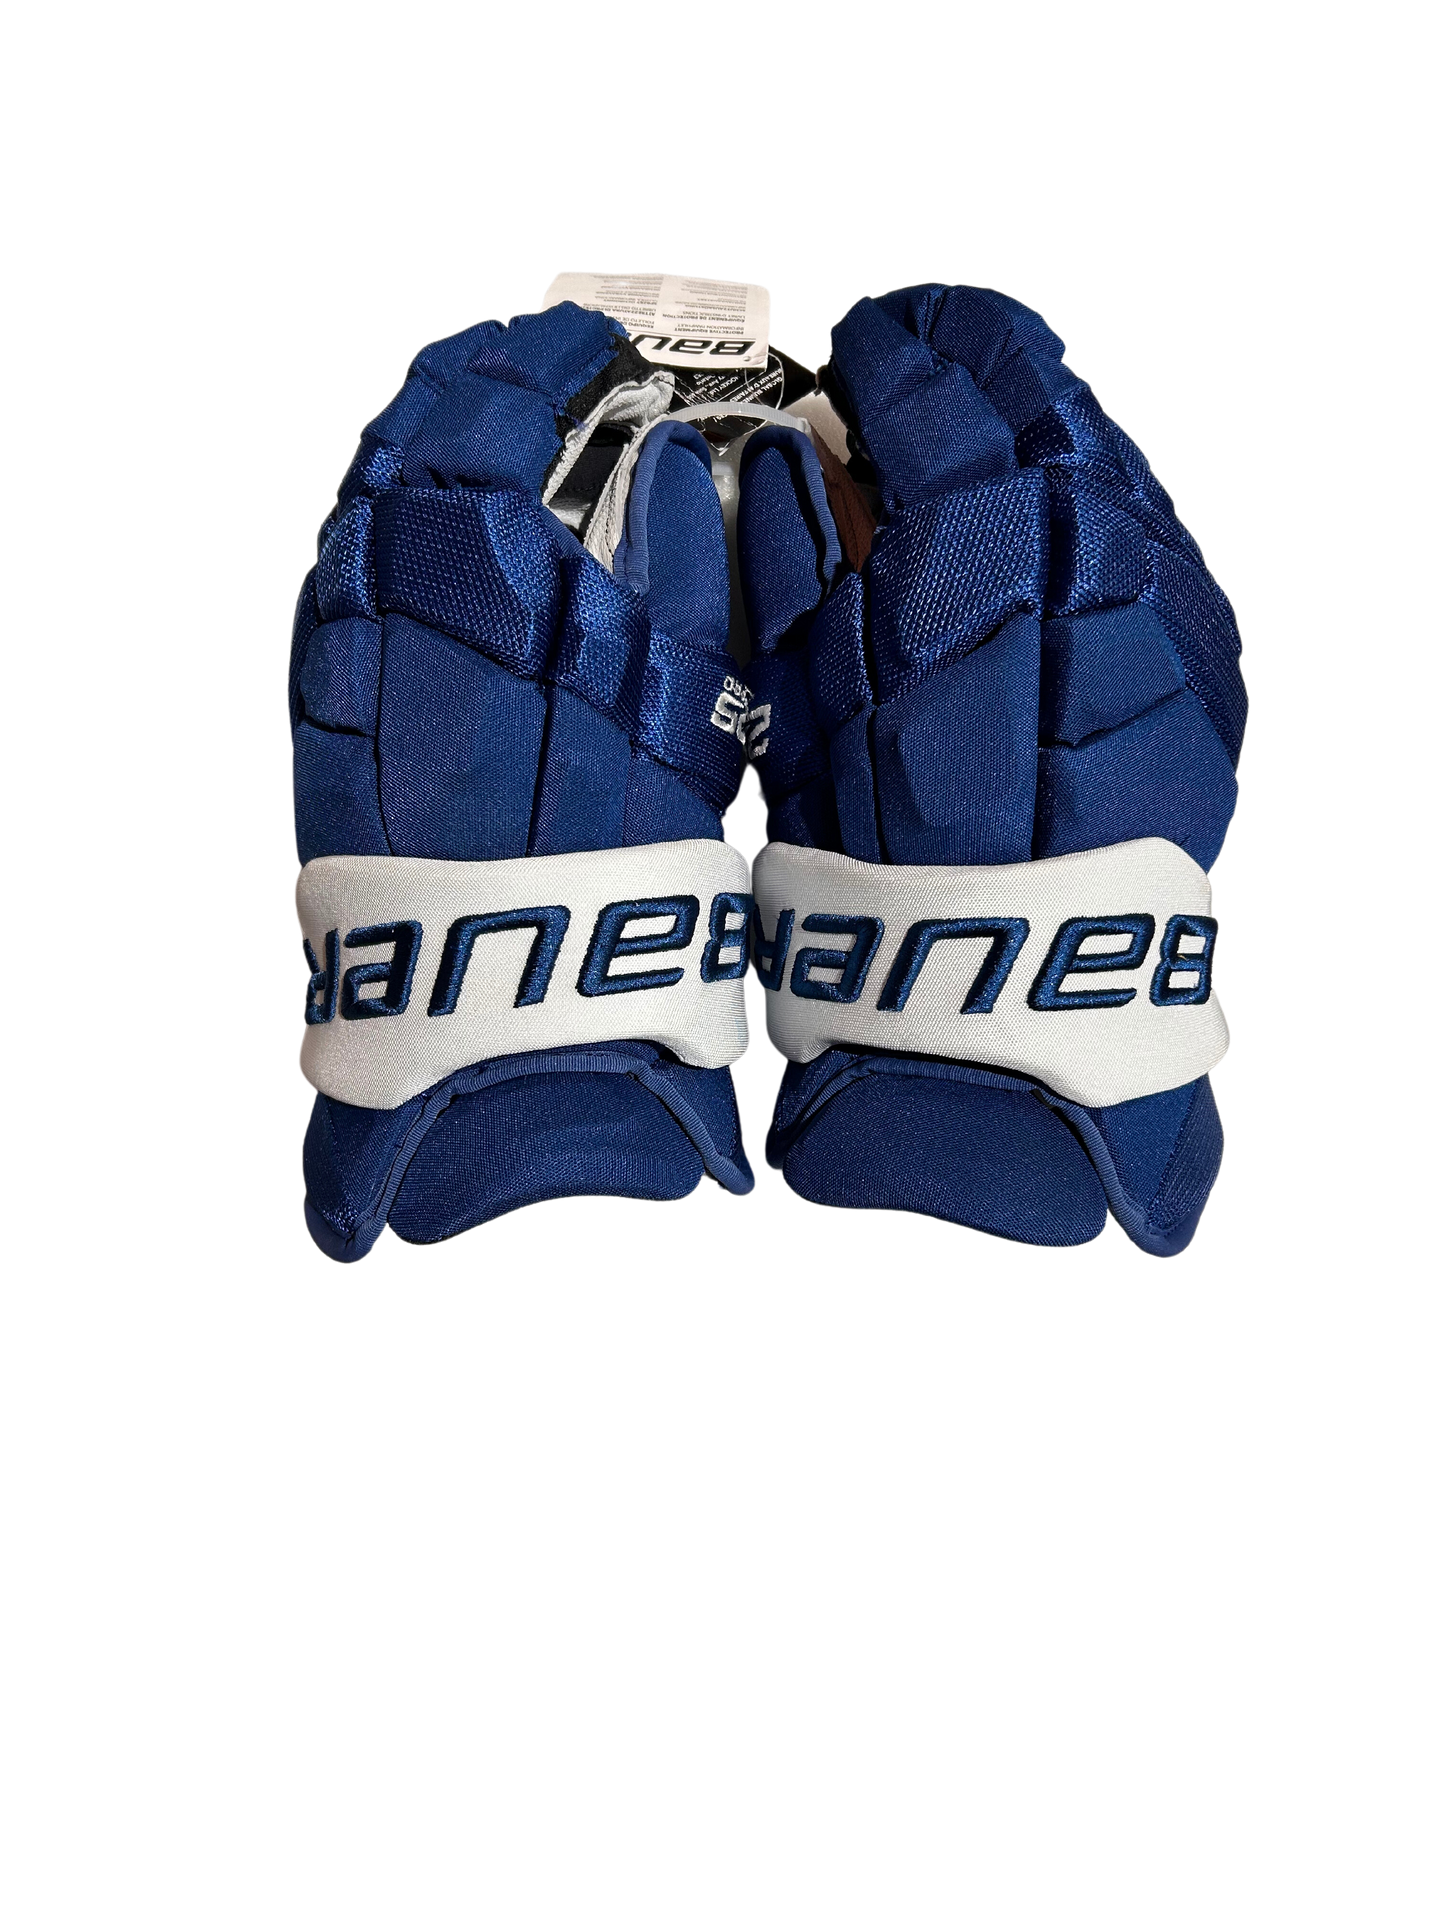 New Blue Colorado Avalanche 14" Bauer 2SPro Gloves (Regular or Extended Cuff)